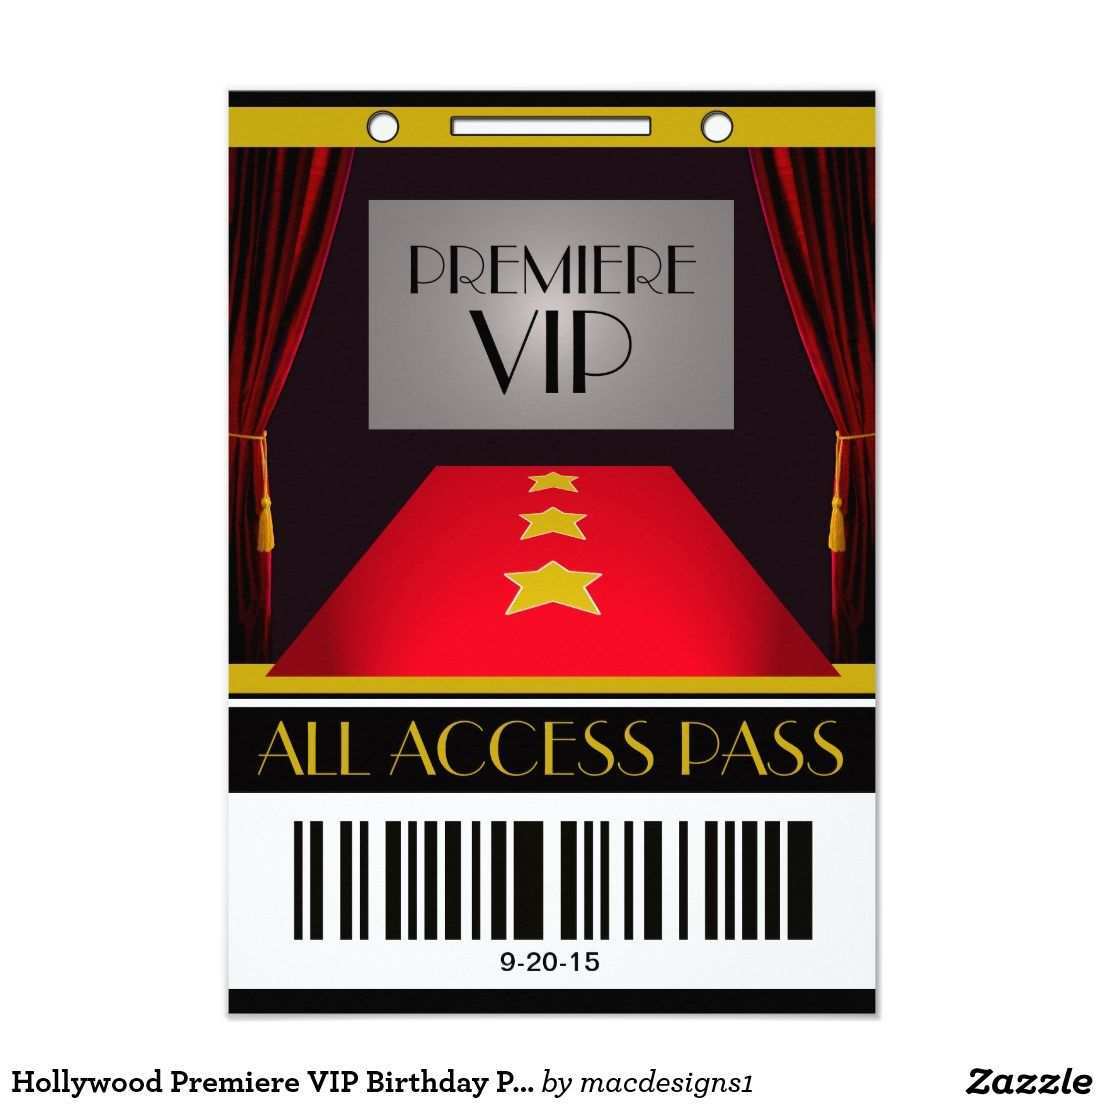 Hollywood Premiere Vip Birthday Party Invitation Zazzle Com In 2020 Hollywood Birthday Parties Hollywood Birthday Hollywood Party Theme